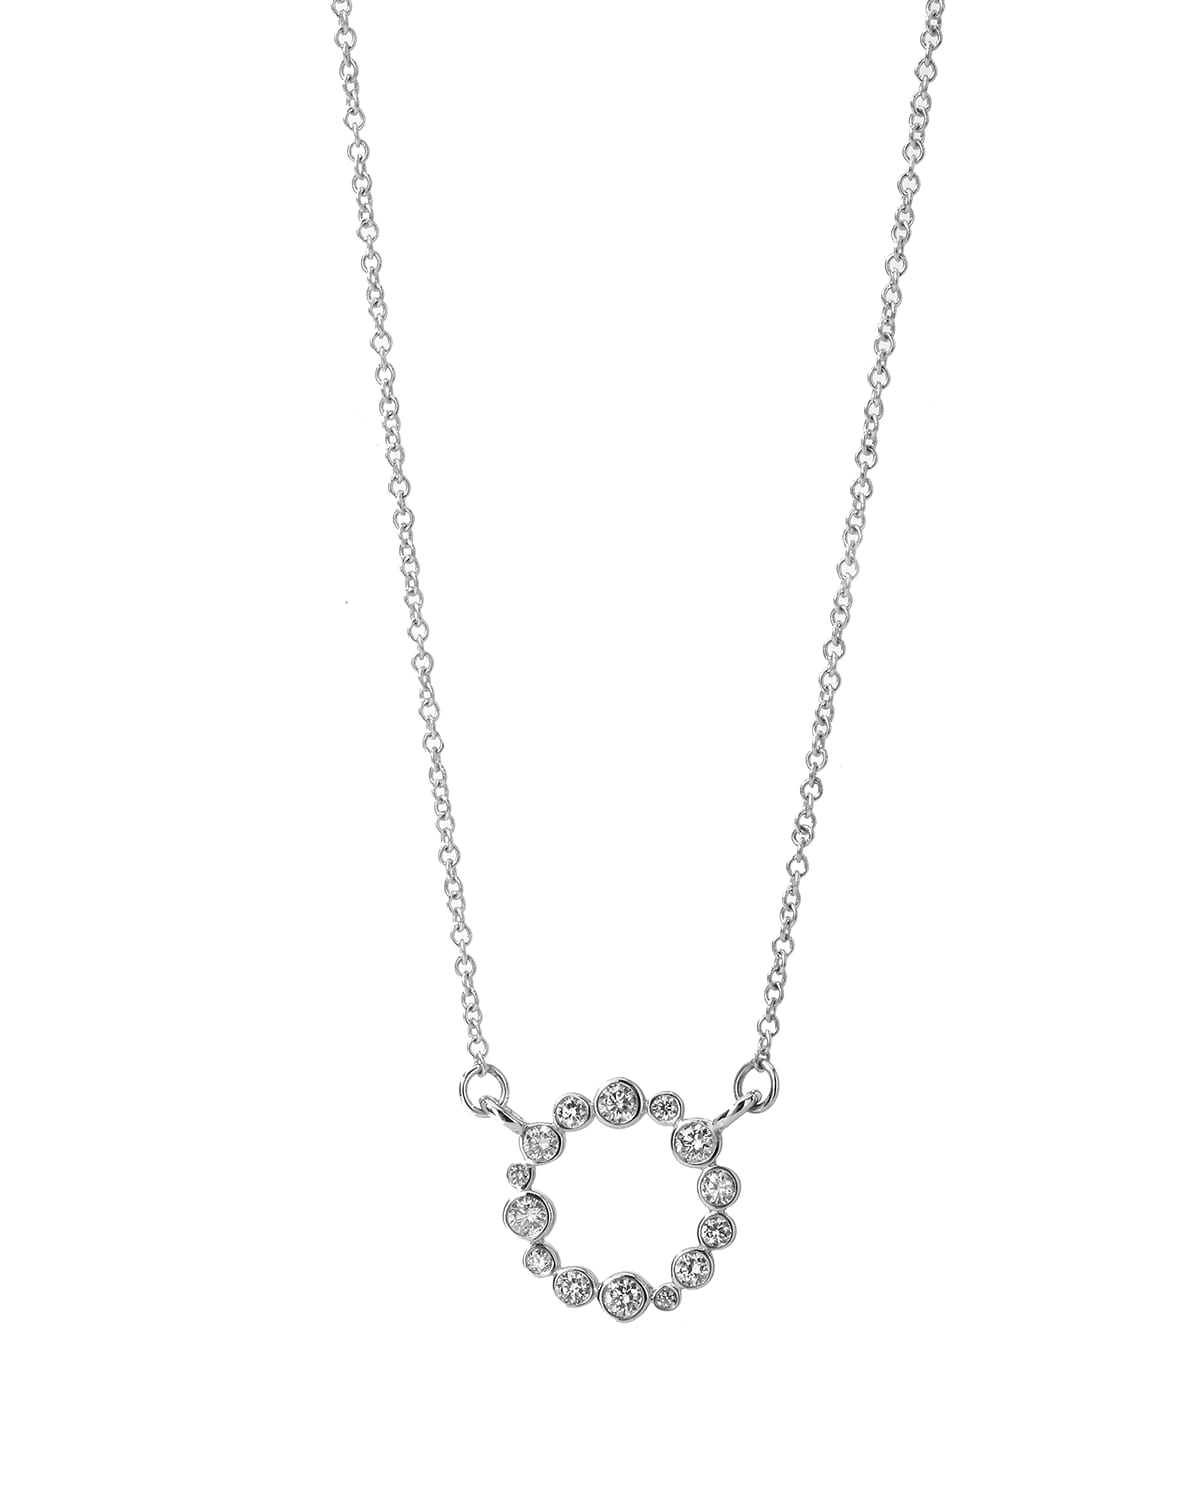 18k White Gold Necklace | Neiman Marcus